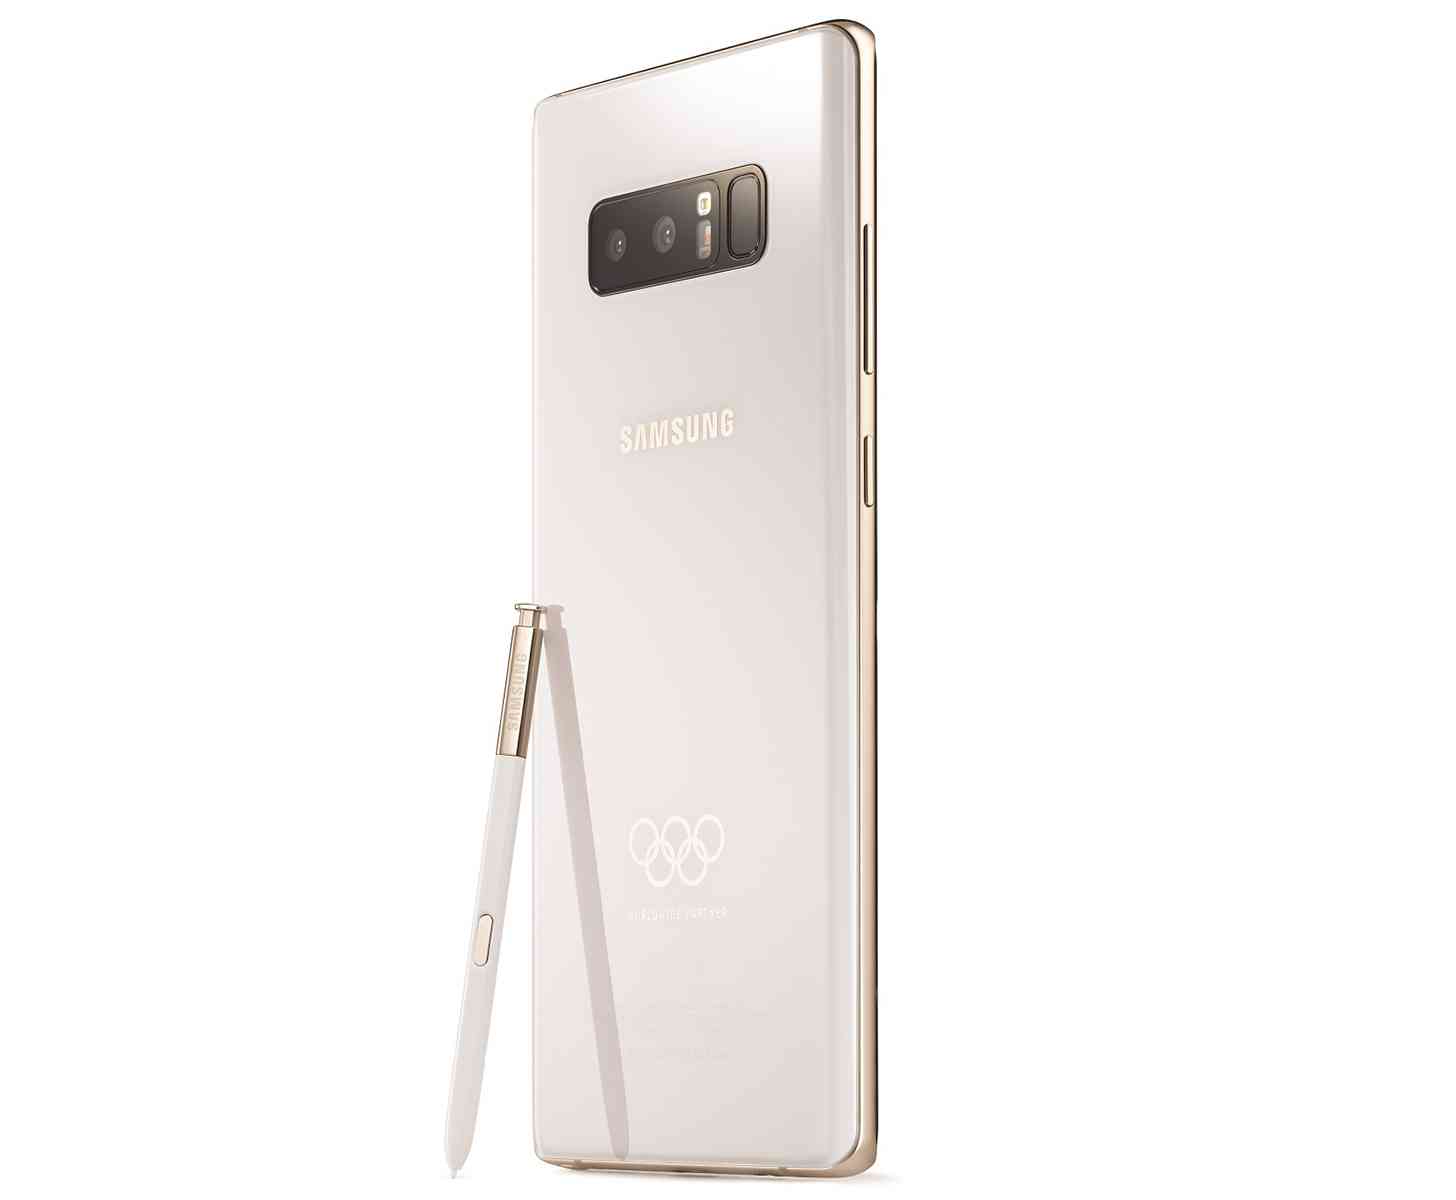 Samsung Galaxy Note 8 2018 Winter Olympics limited edition